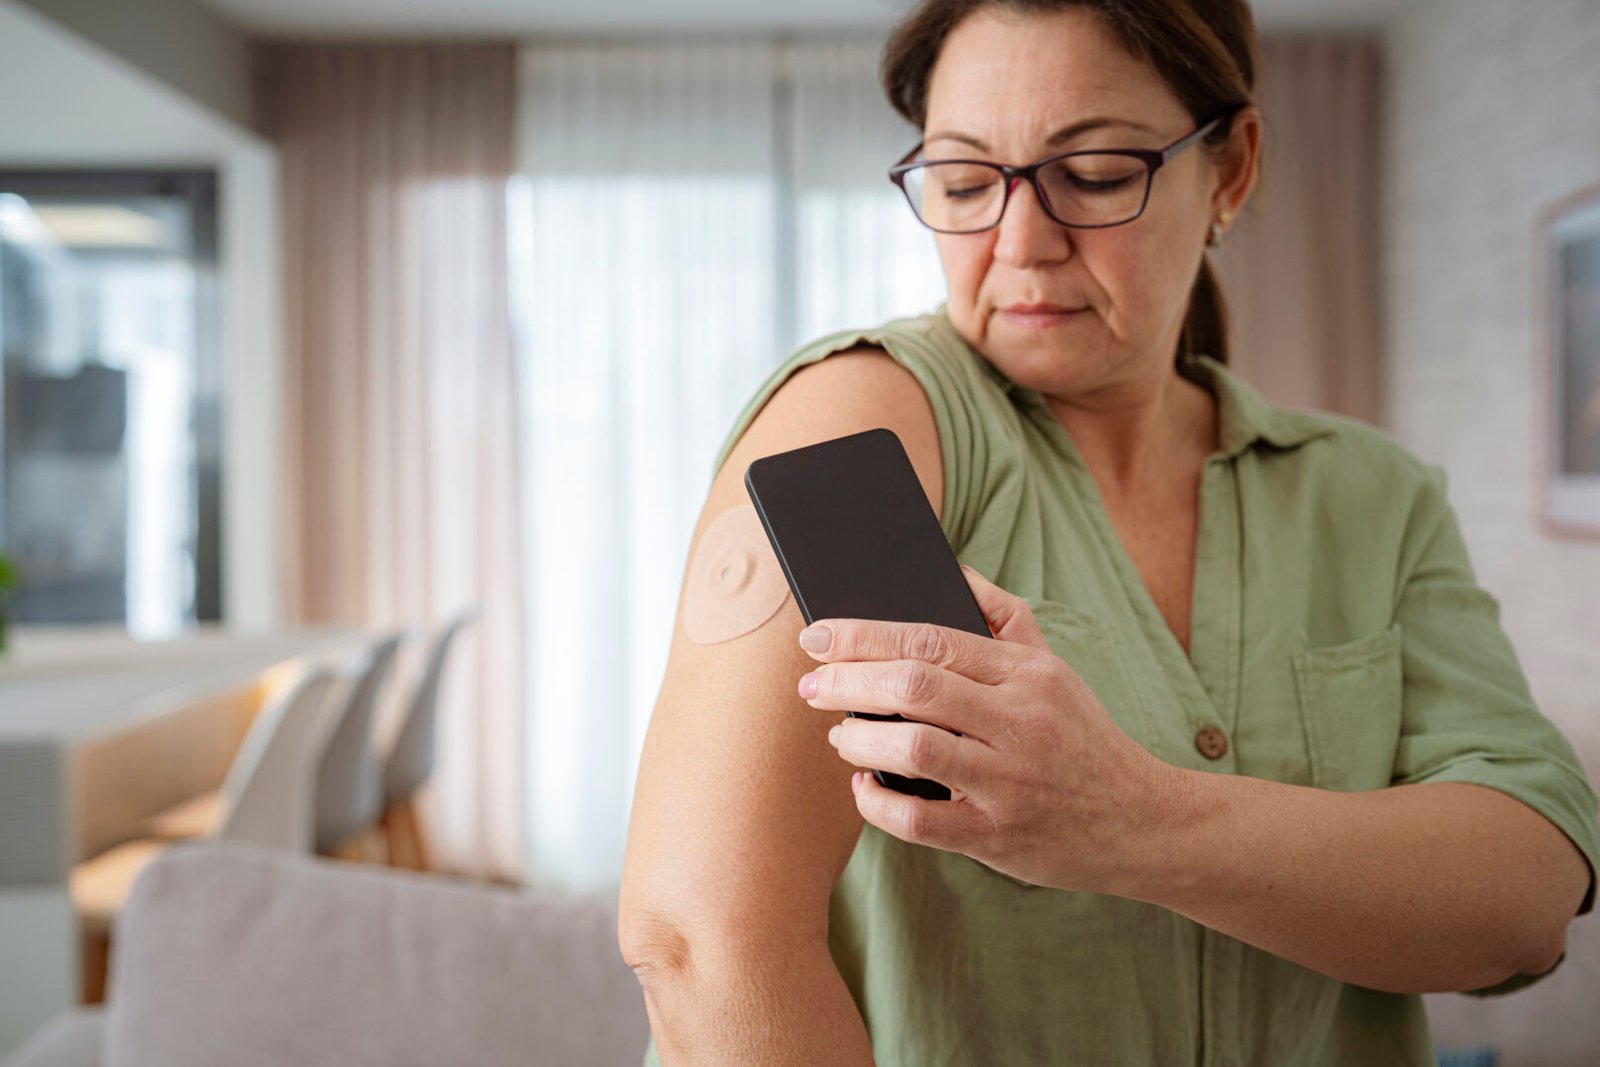 A woman with diabetes uses a CGM to check her blood glucose level.